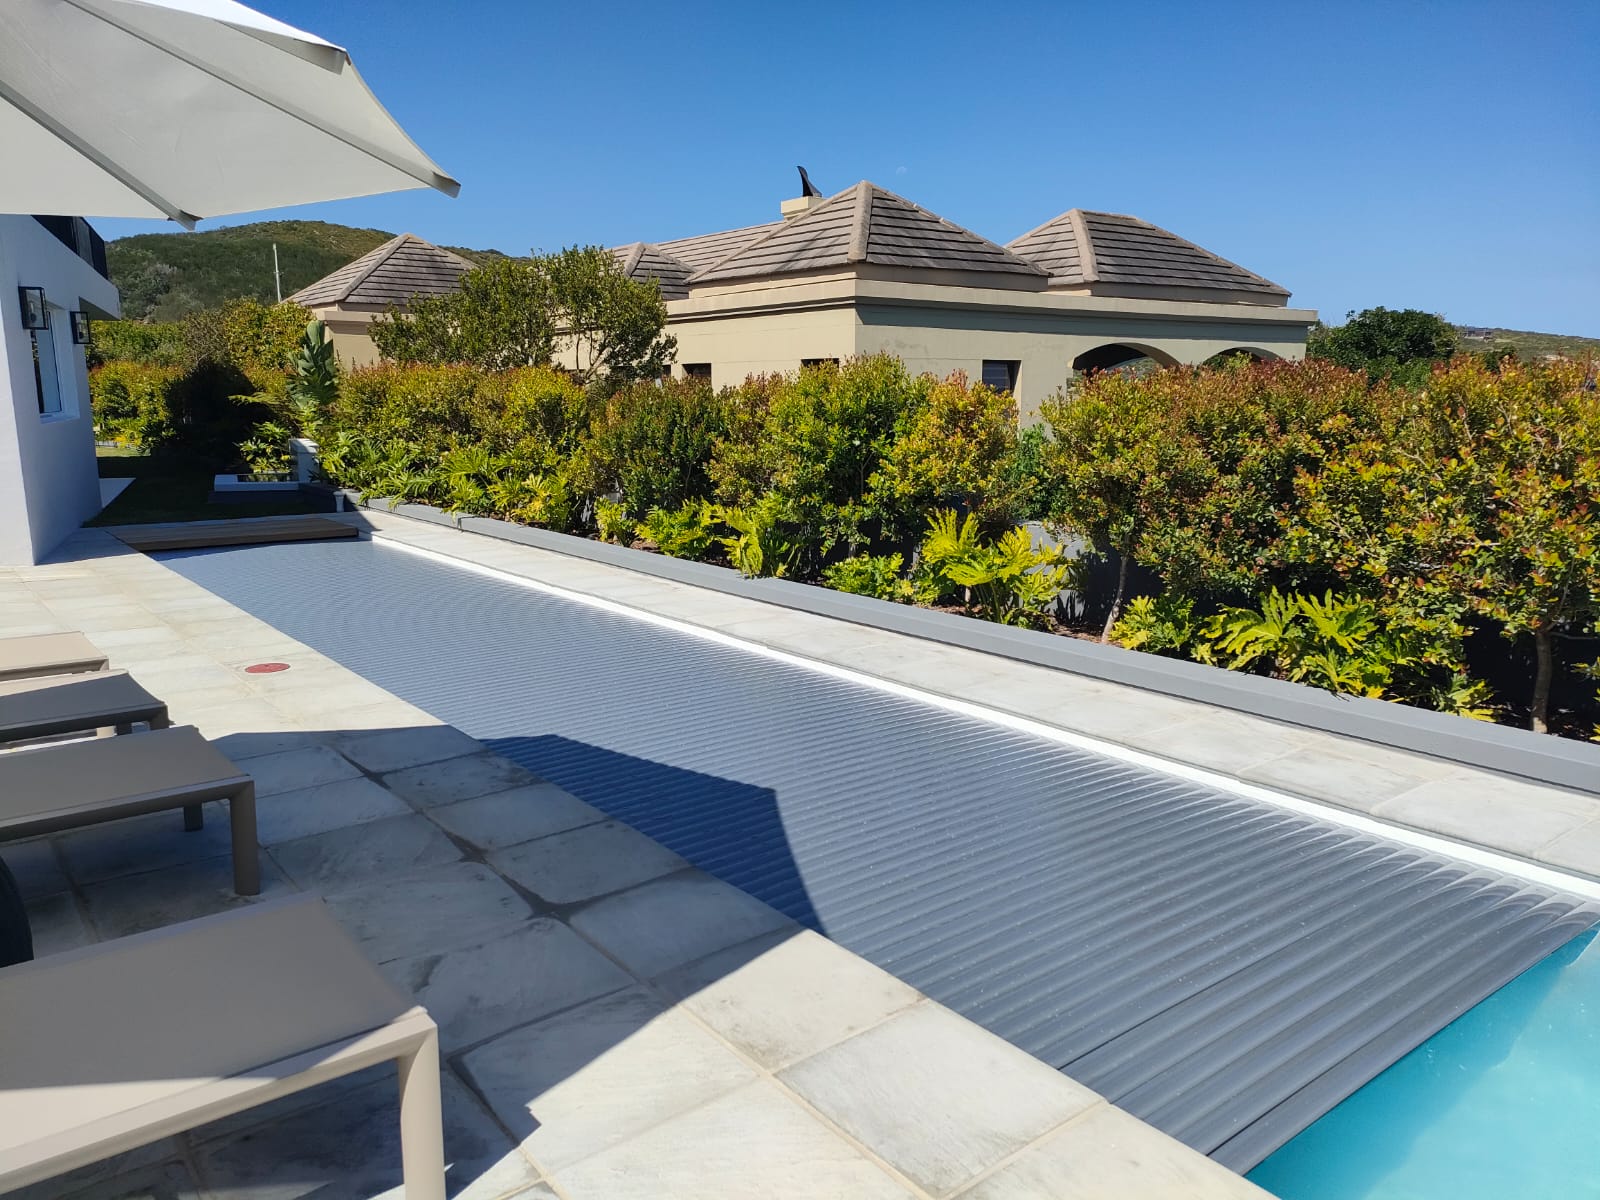 designer pool covers A swimming pool with lounge chairs and umbrellas, while providing solutions on how to keep cats off pool cover.